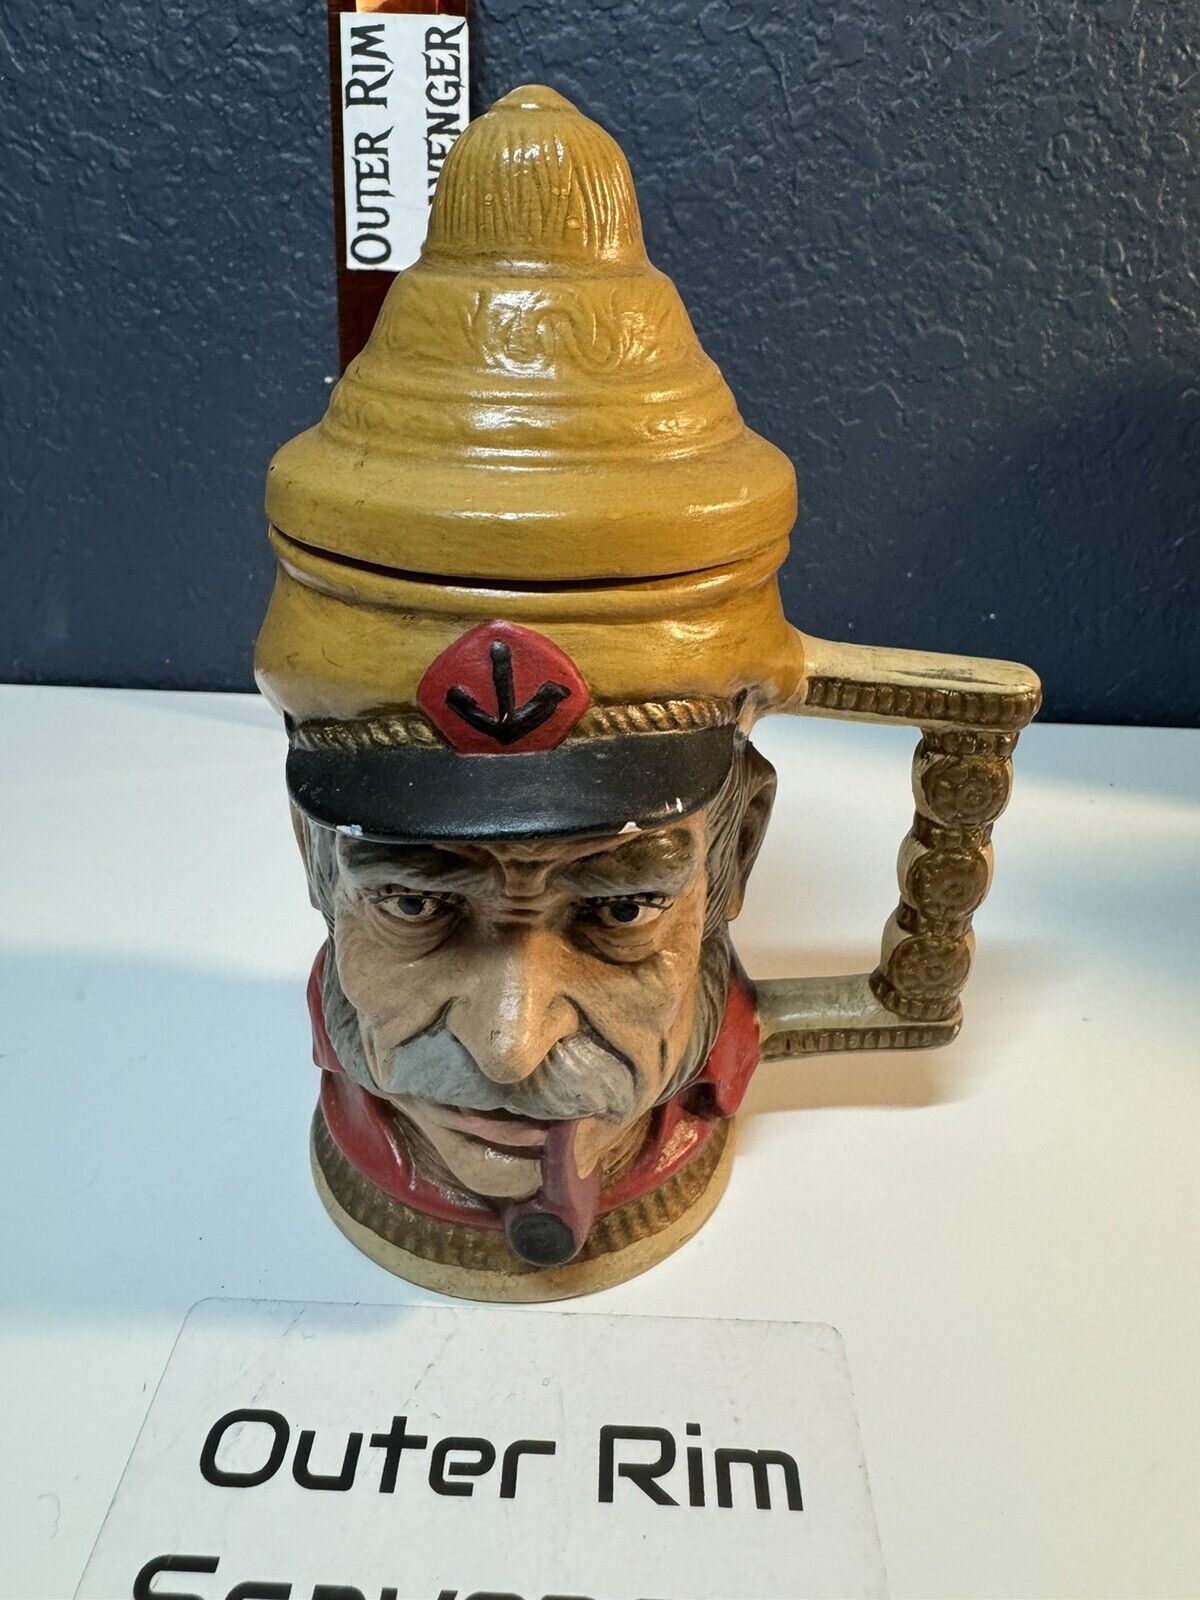 Sailor Mug Hand Painted. Very Detailed. In Good Condition. Vintage 70s.